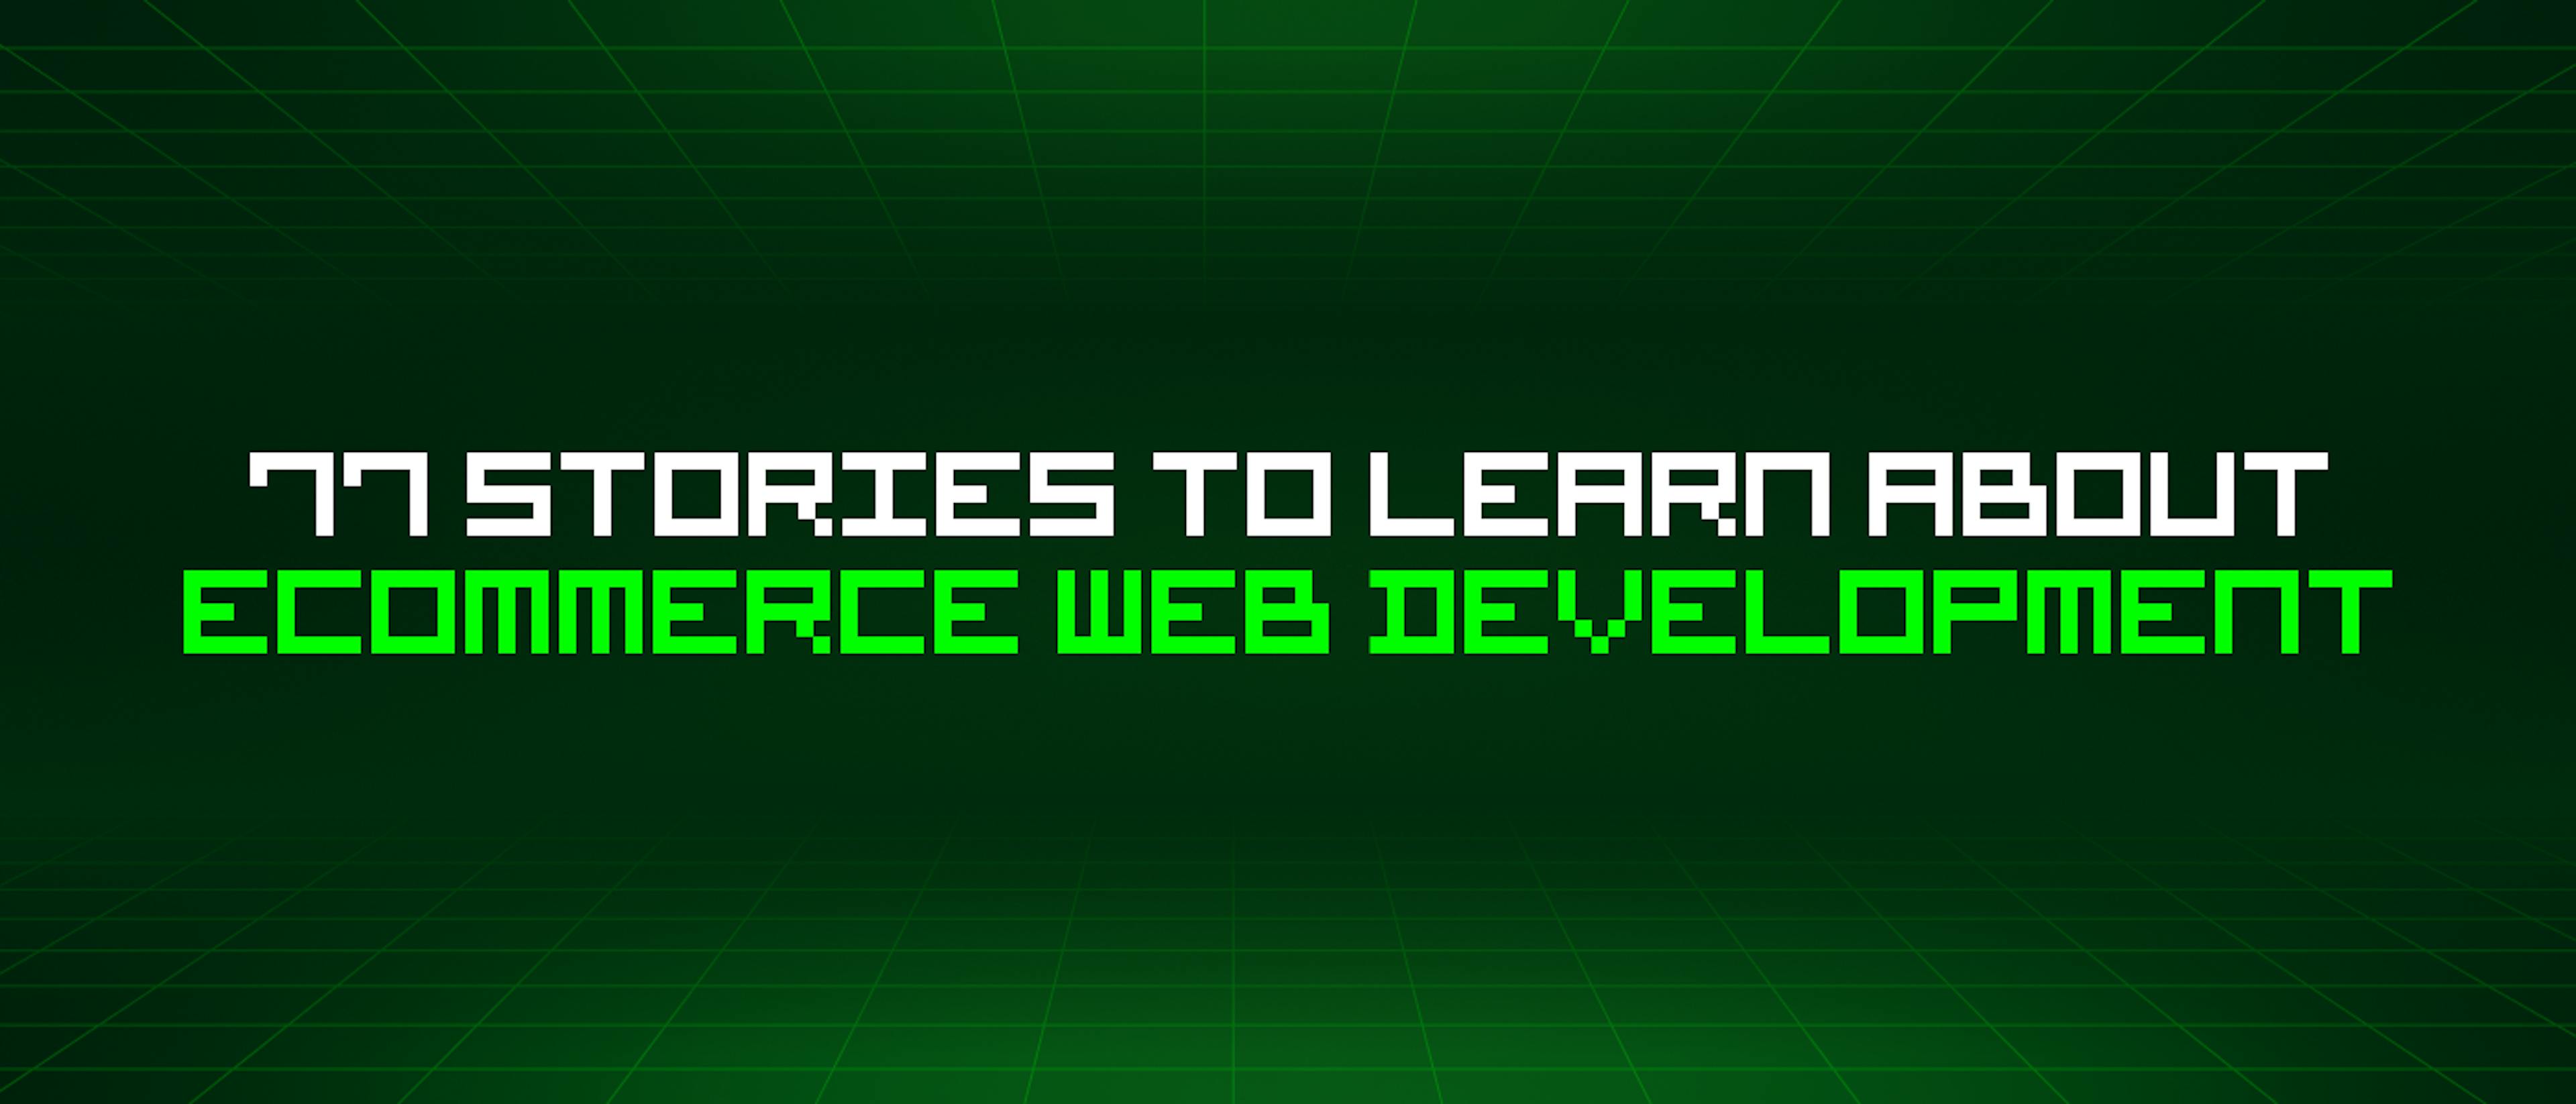 featured image - 77 Stories To Learn About Ecommerce Web Development